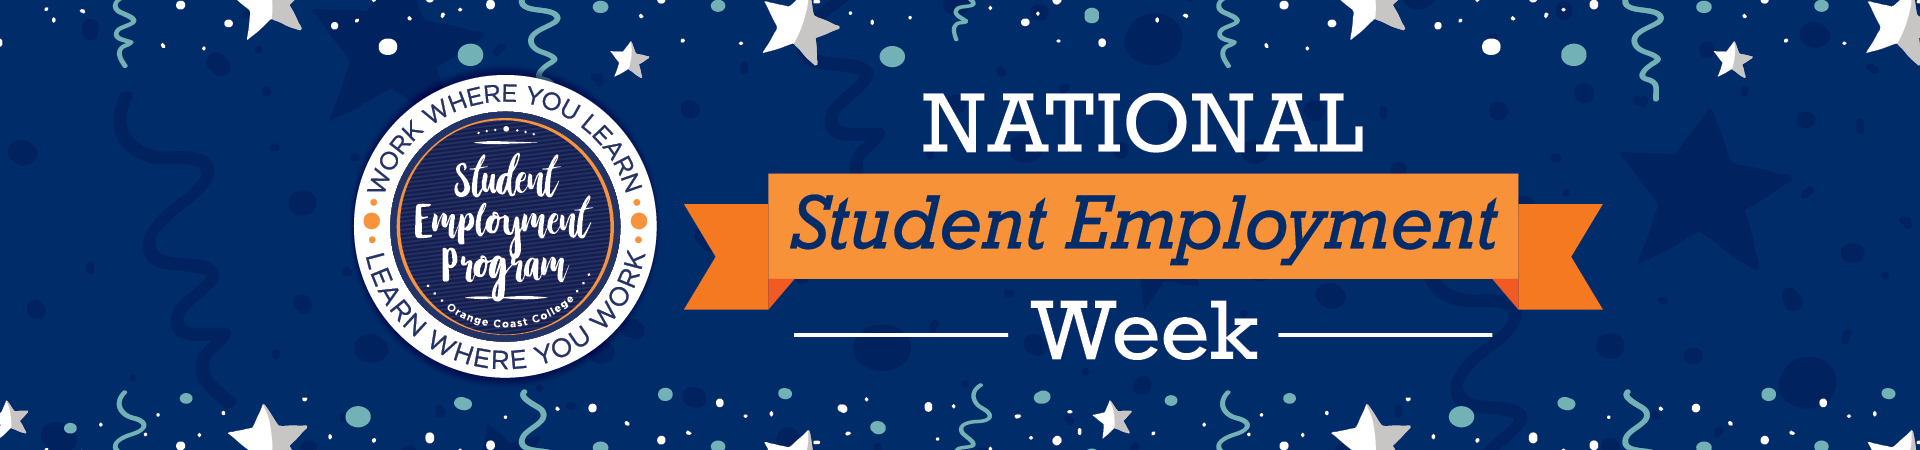 Stars and streamers. Text: National Student Employment Week.